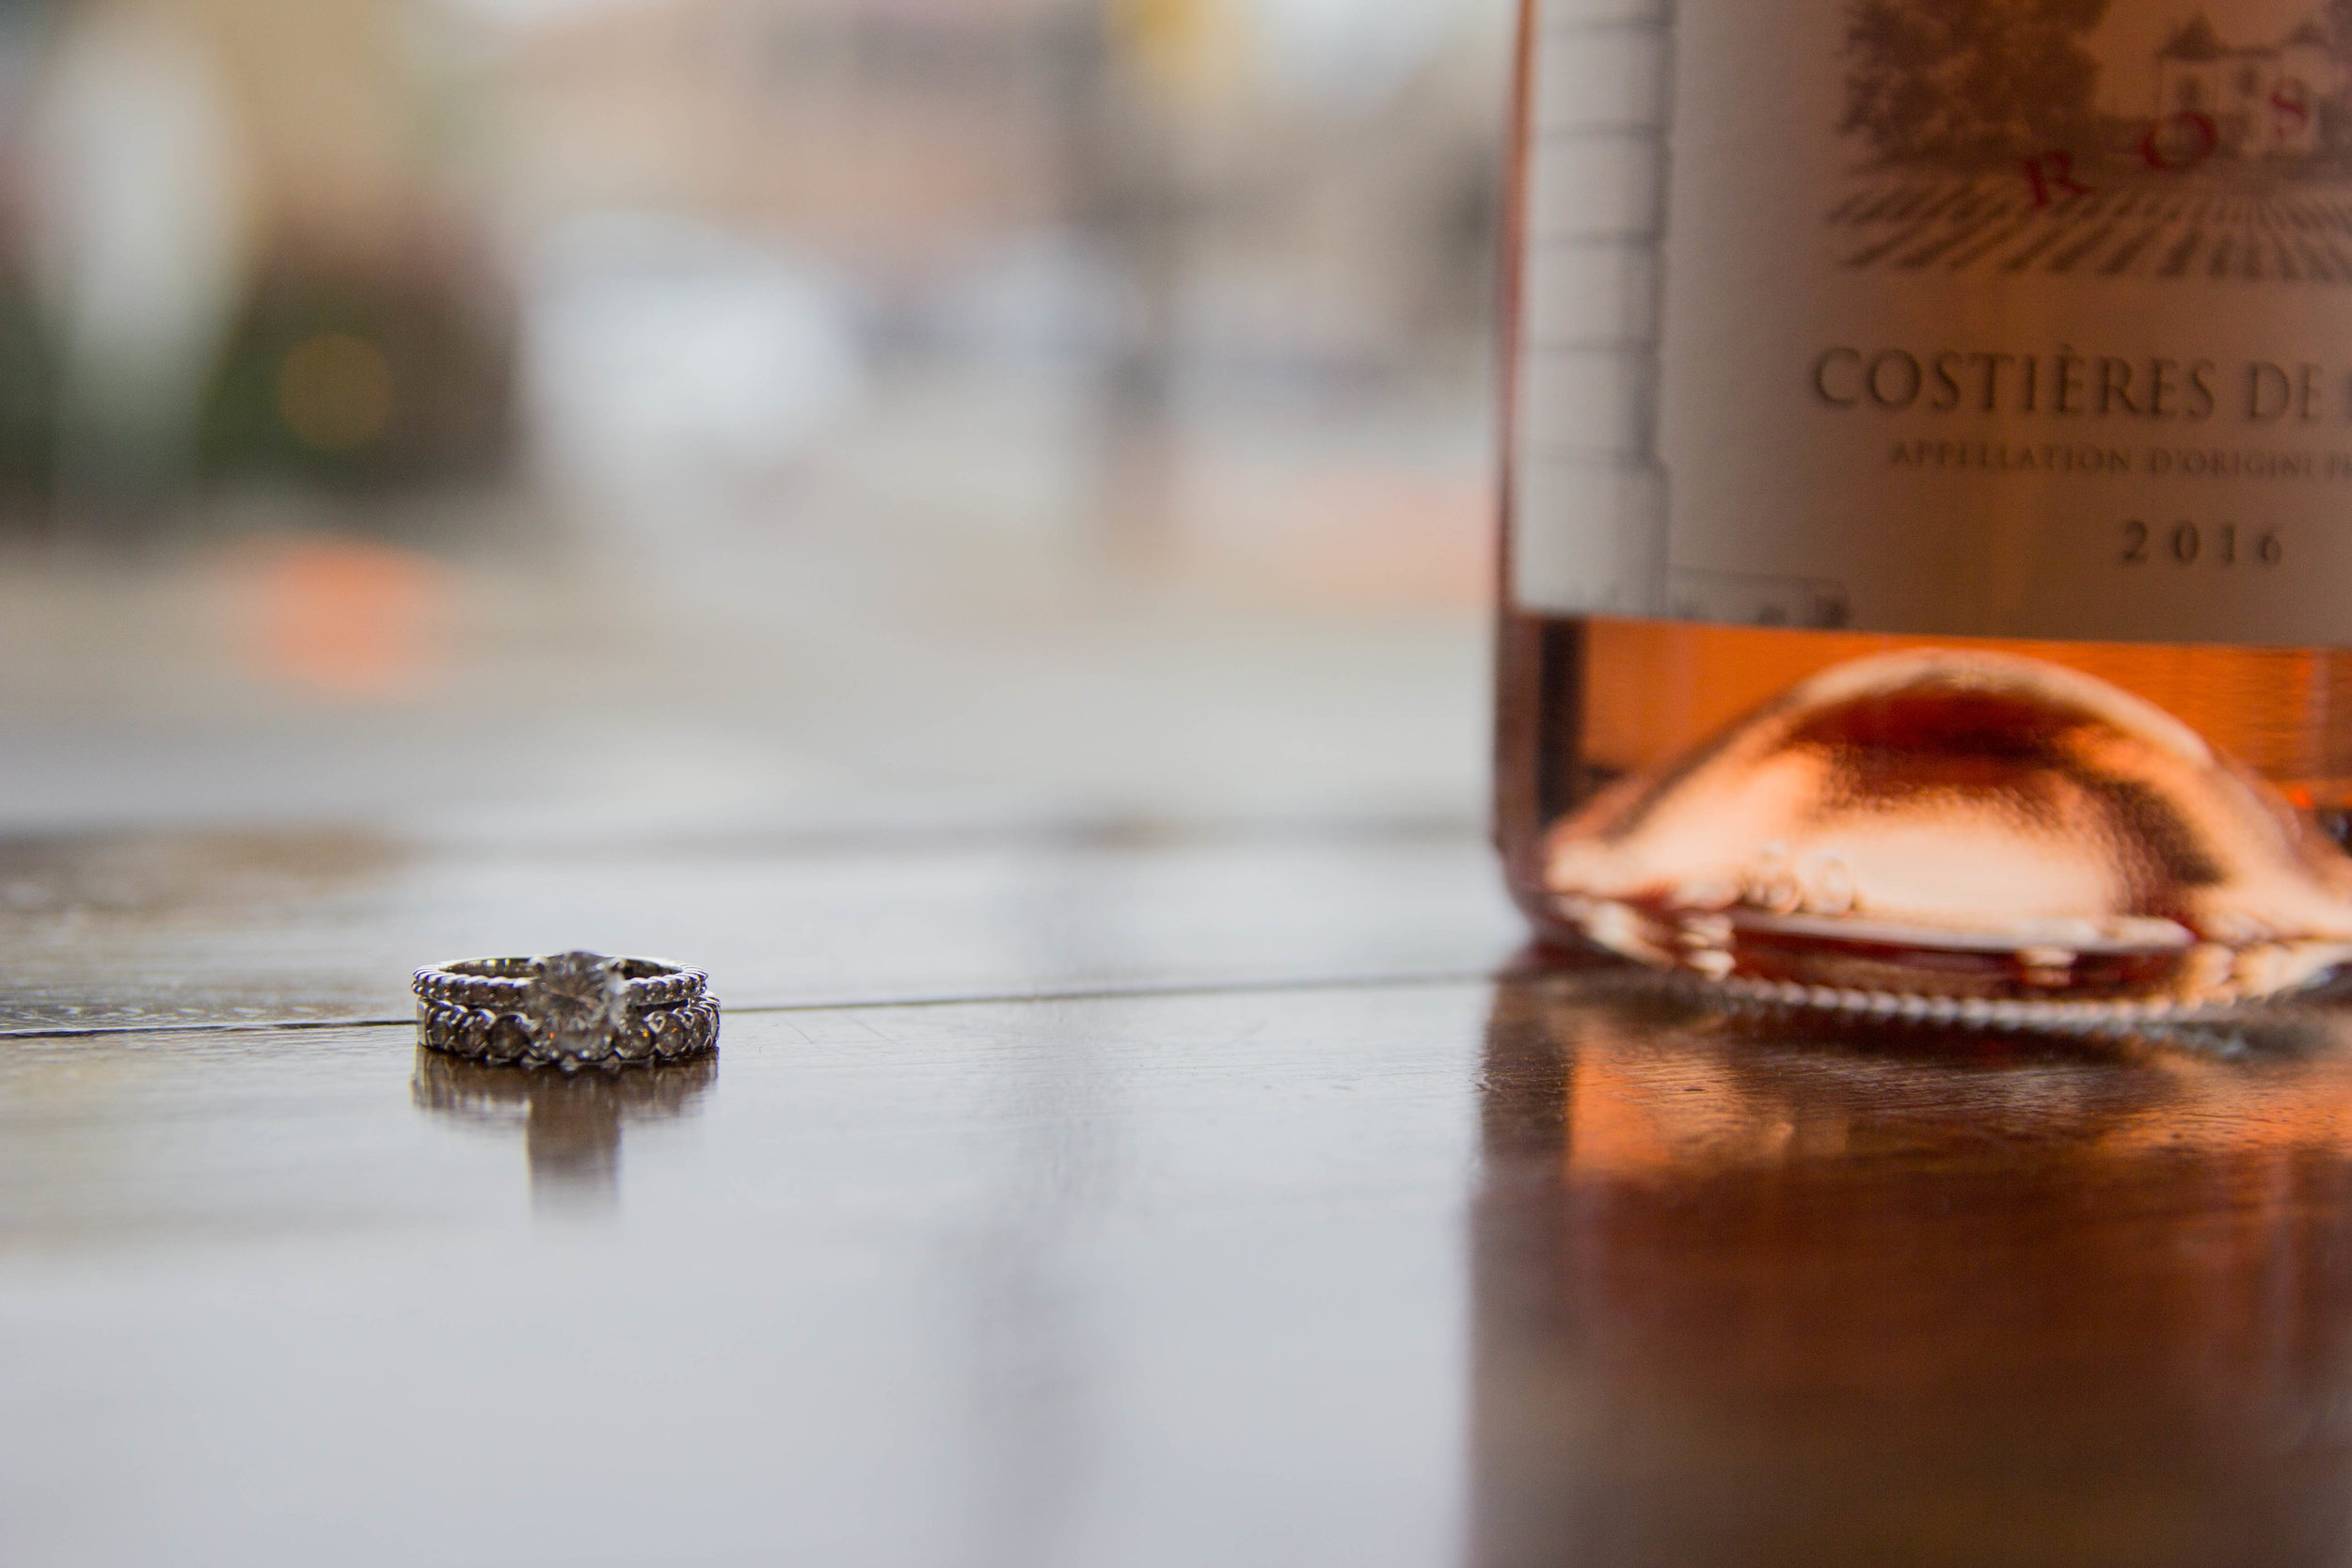 jewelers mutual, fuller's jewelry, where to get your engagement ring in dallas, where to get your wedding rings in dallas, wine poste, bar anatomie, neighborhood cellar, bishop arts district, rose all day, how to keep your engagement ring shiny even…